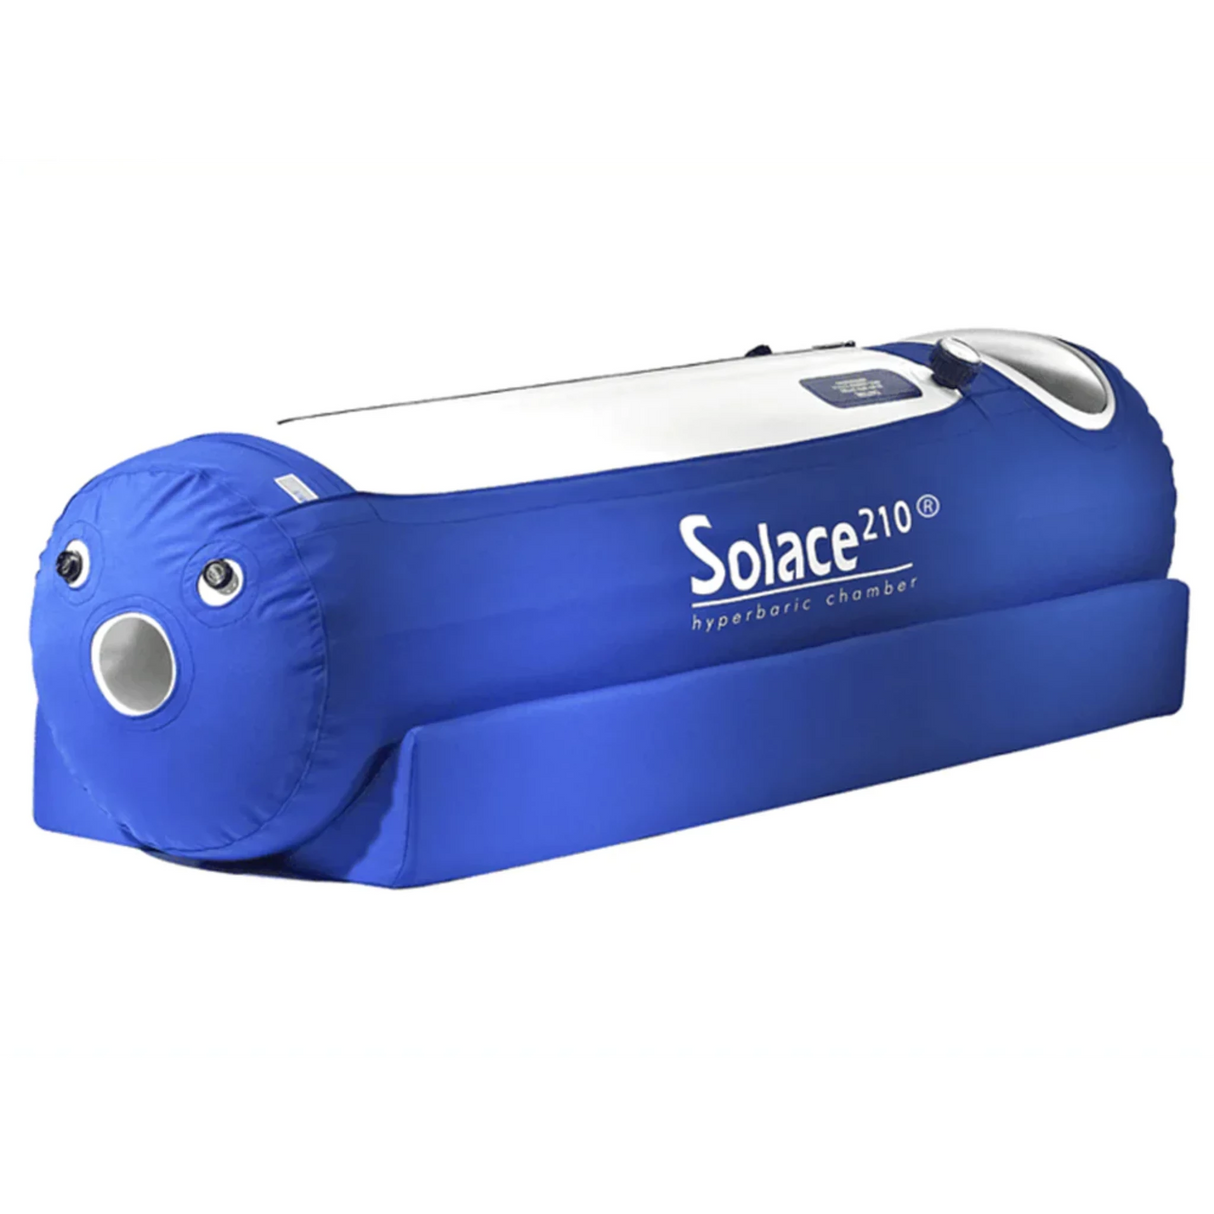 OxyHealth Solace210 Hyperbaric Chamber